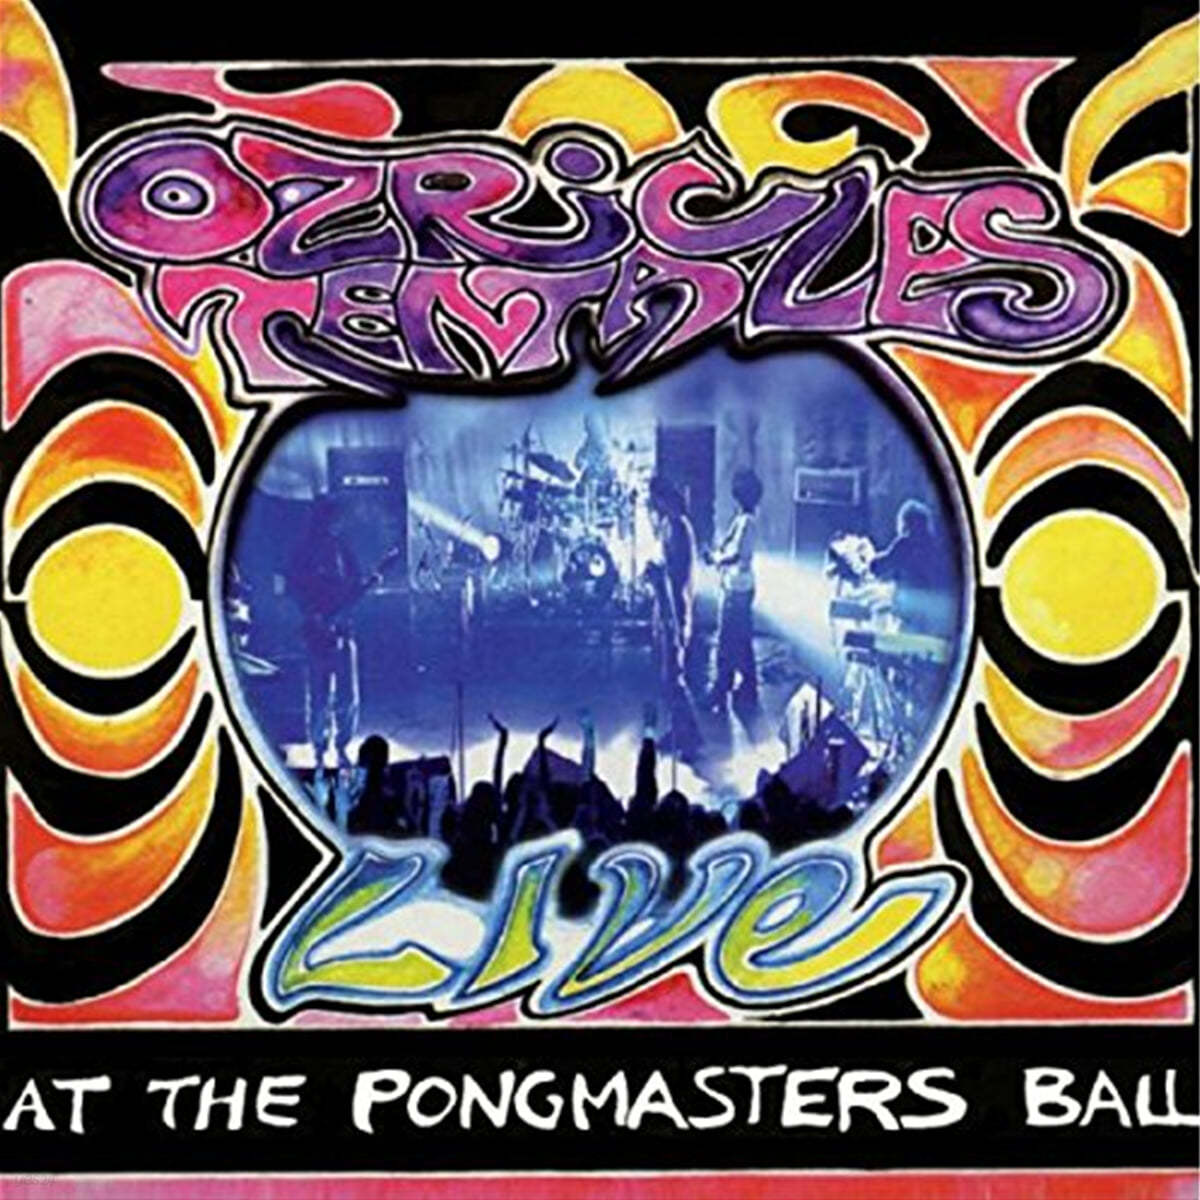 Ozric Tentacles (오즈릭 텐터클스) - At The Pongmasters Ball [2LP] 